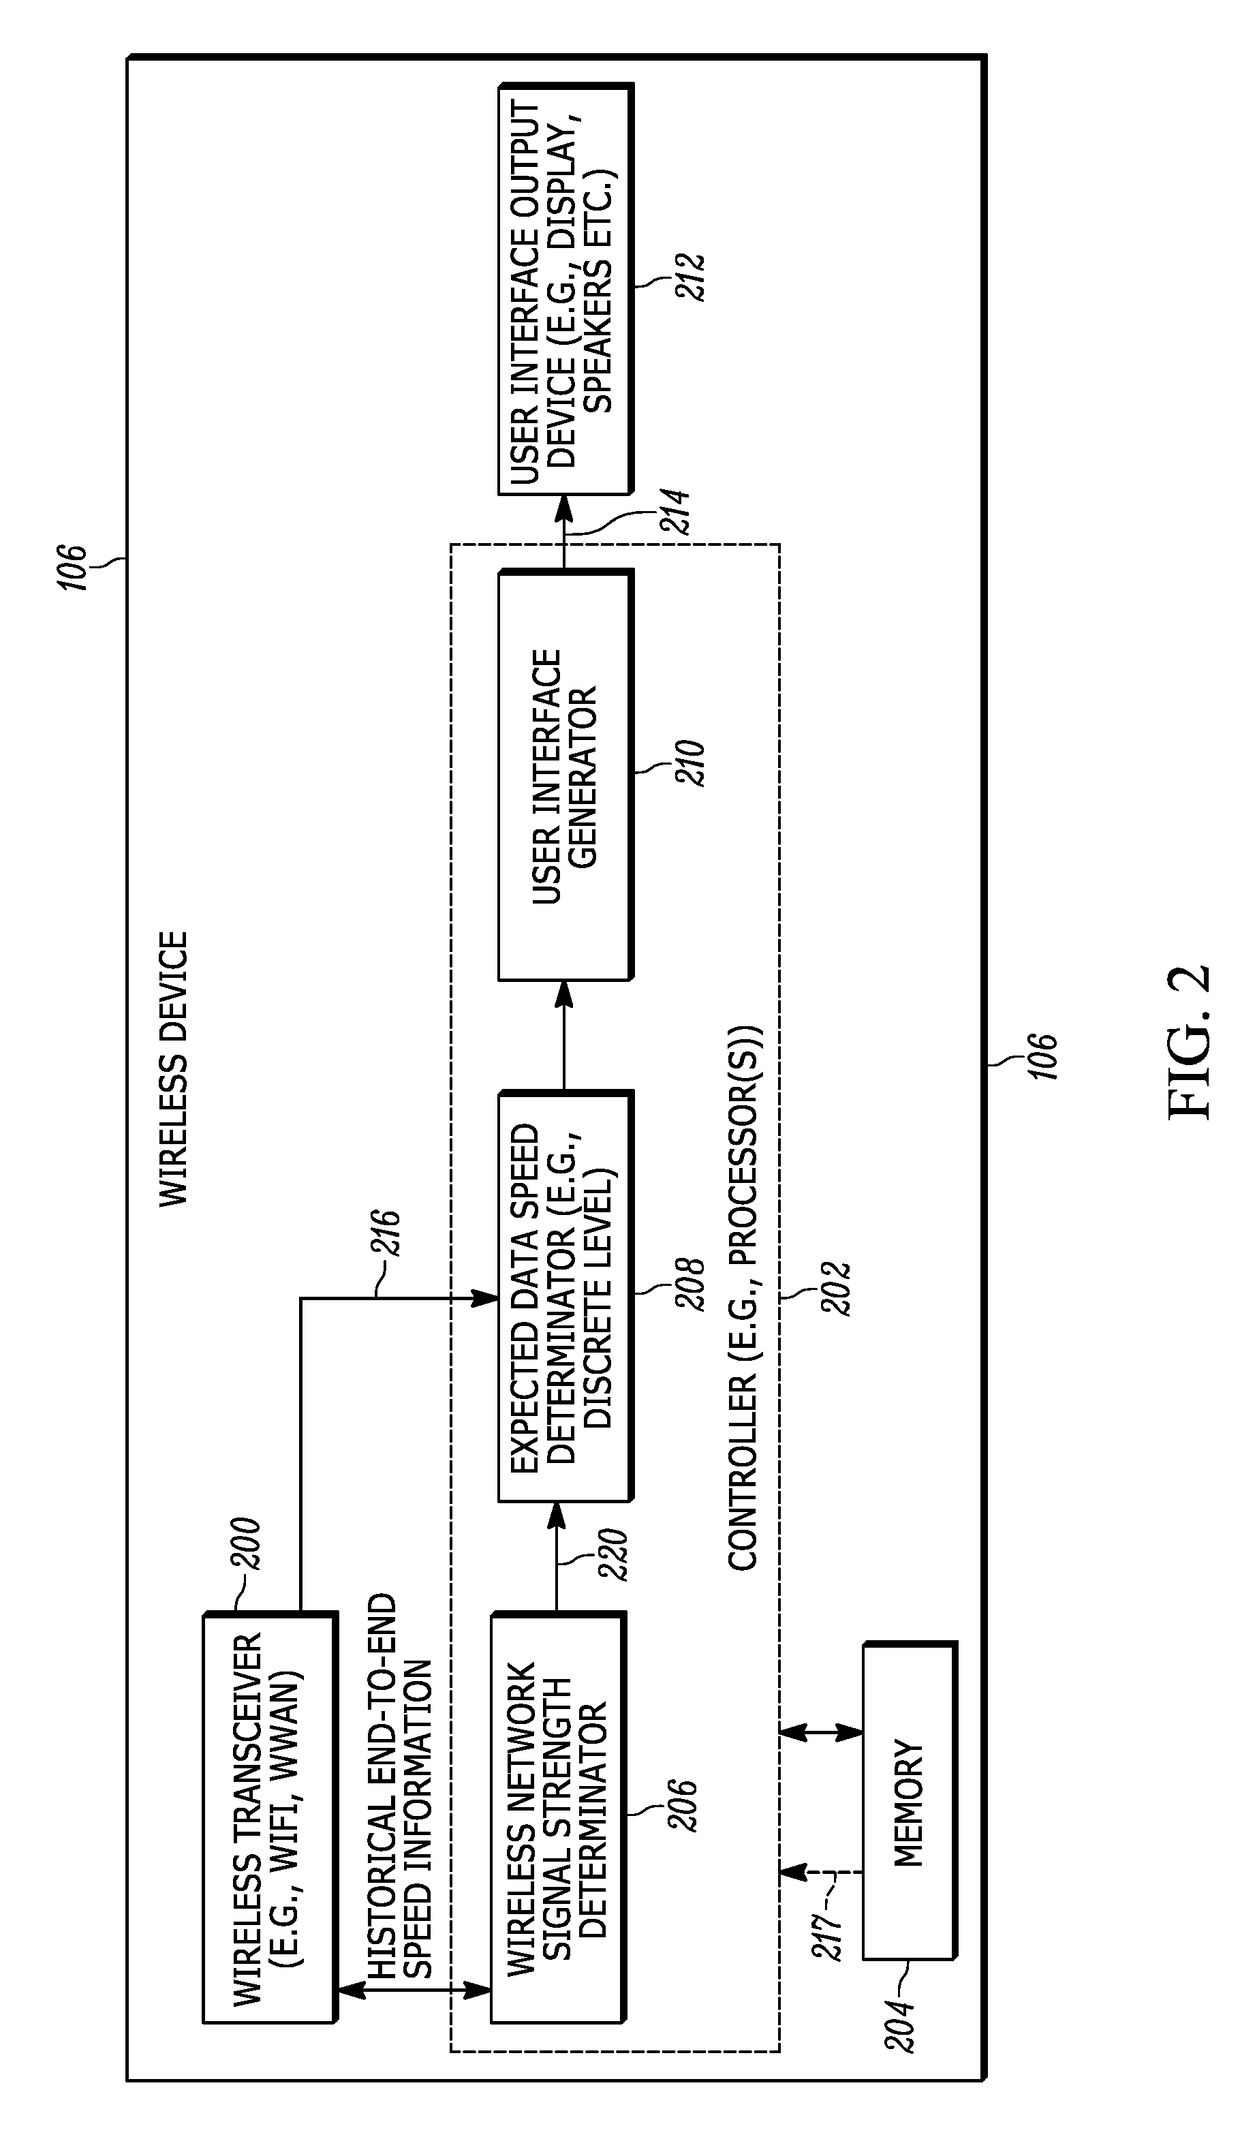 Method, apparatus and system for providing wireless network speed information